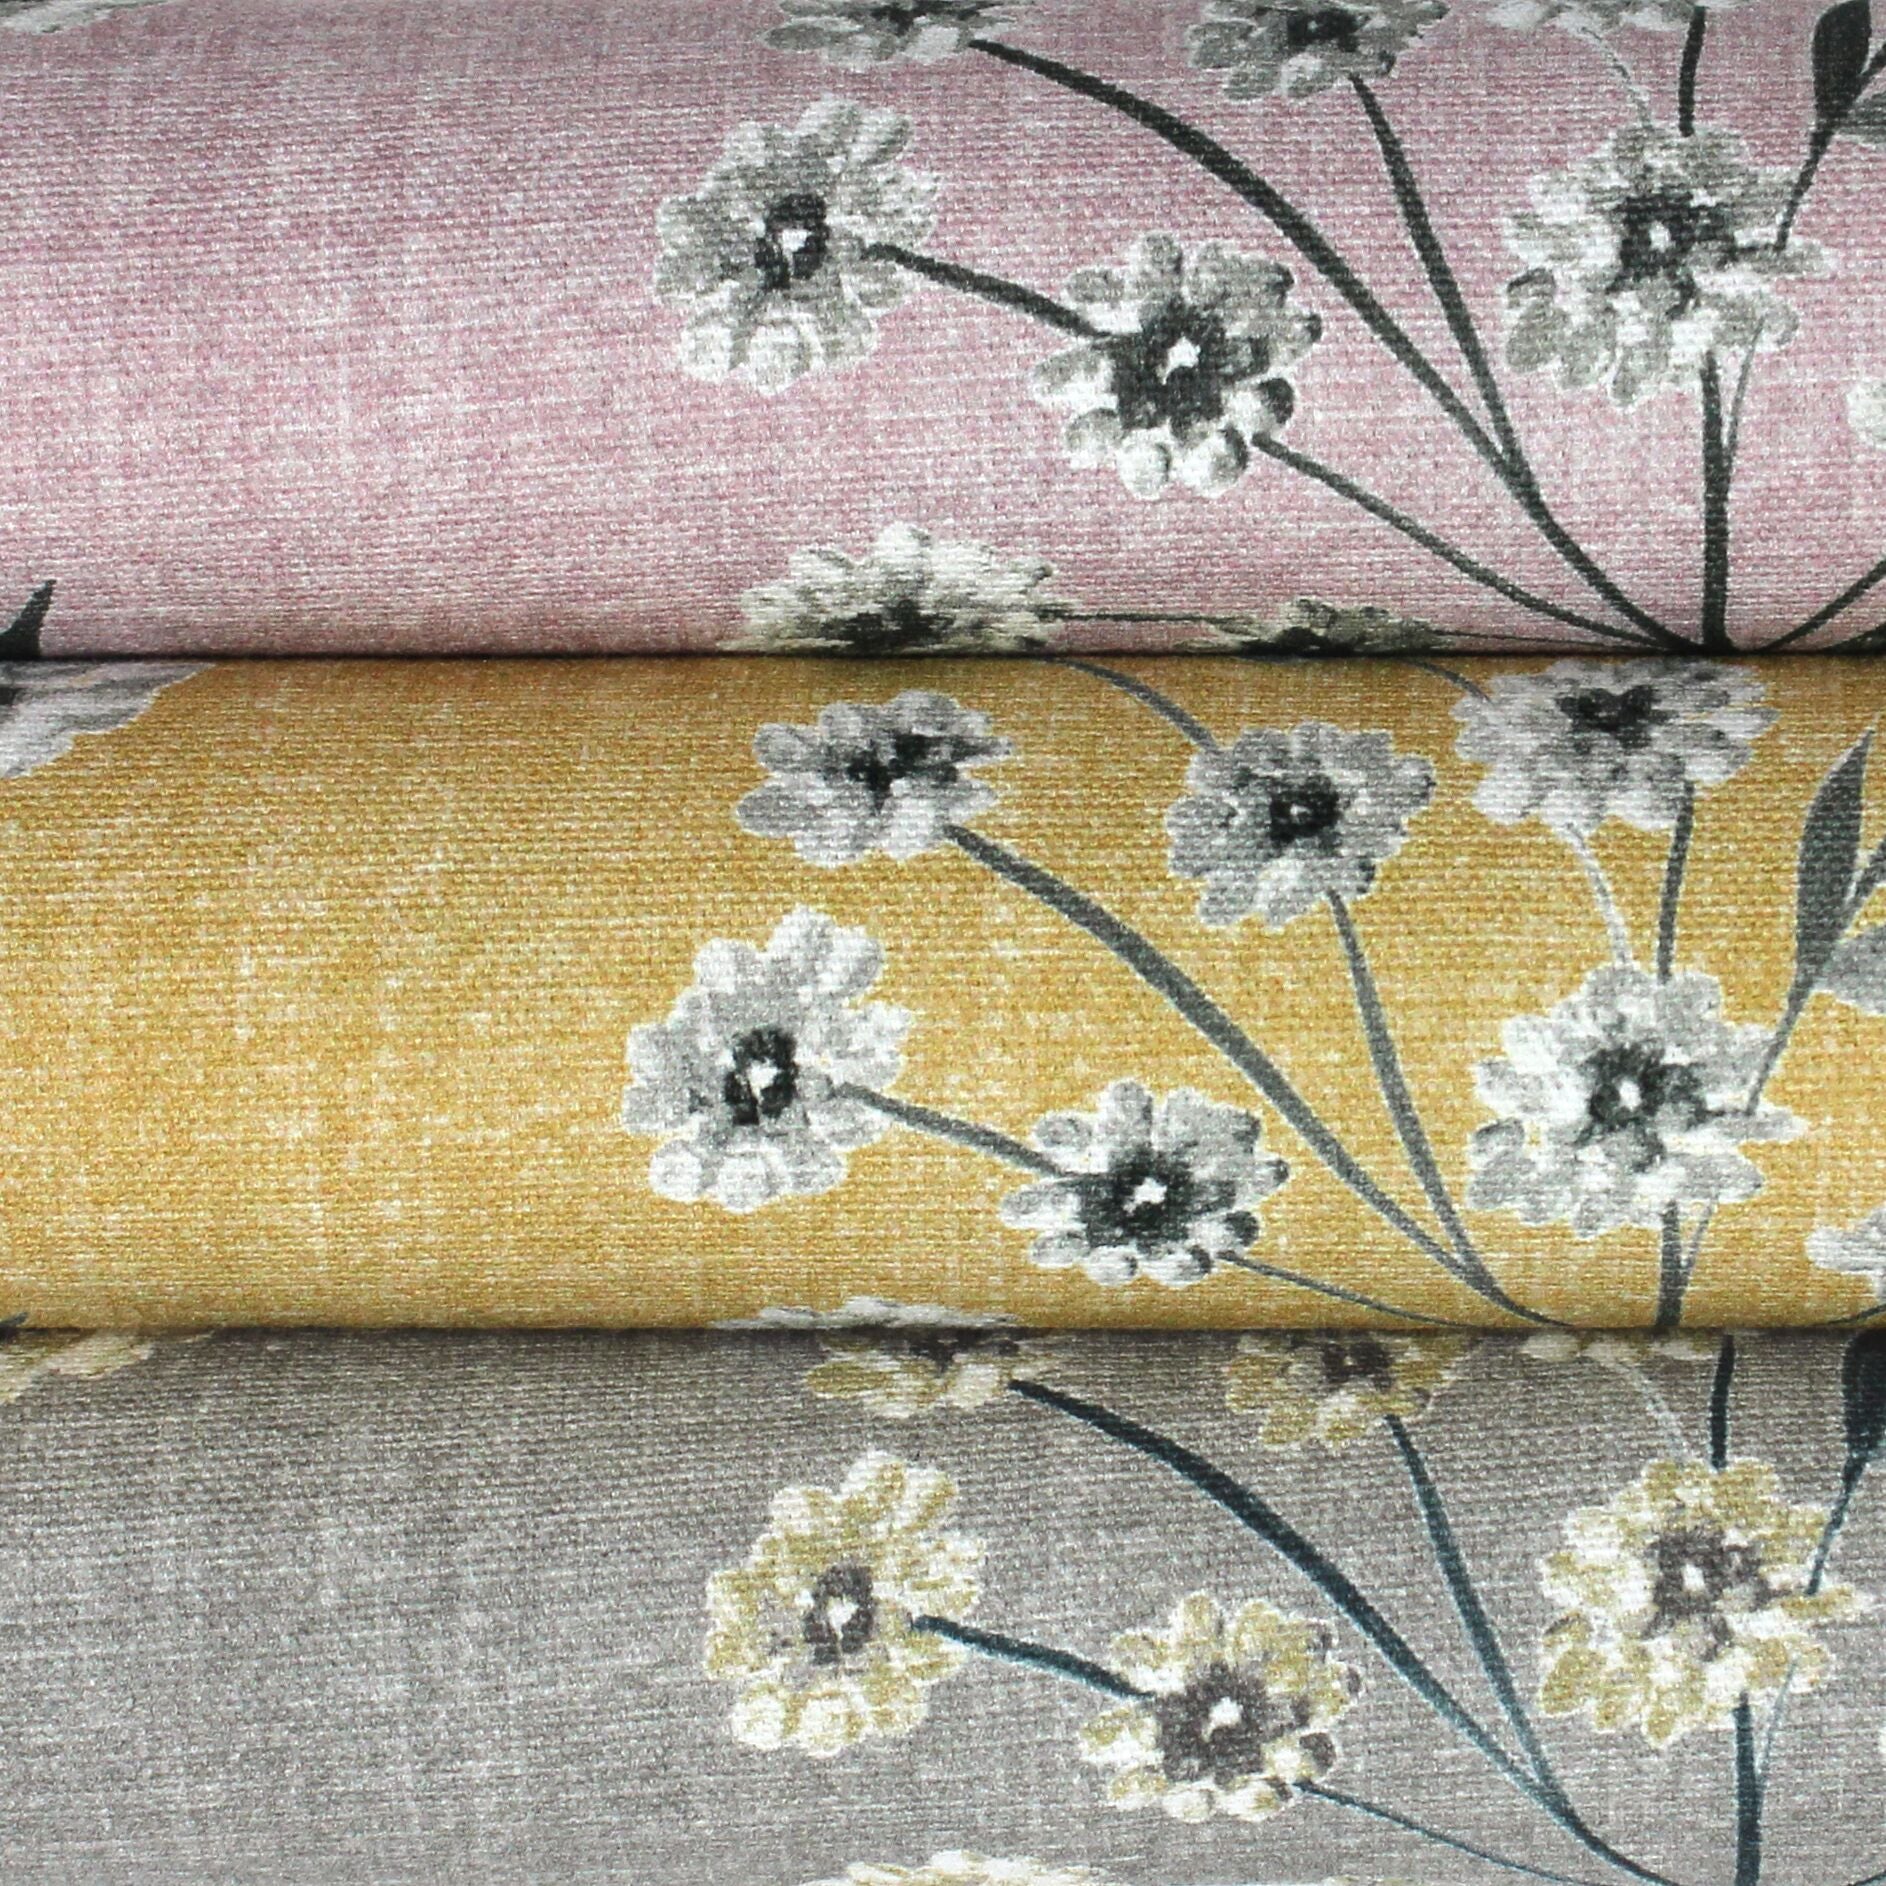 McAlister Textiles Meadow Blush Pink Floral Cotton Print Fabric Fabrics 